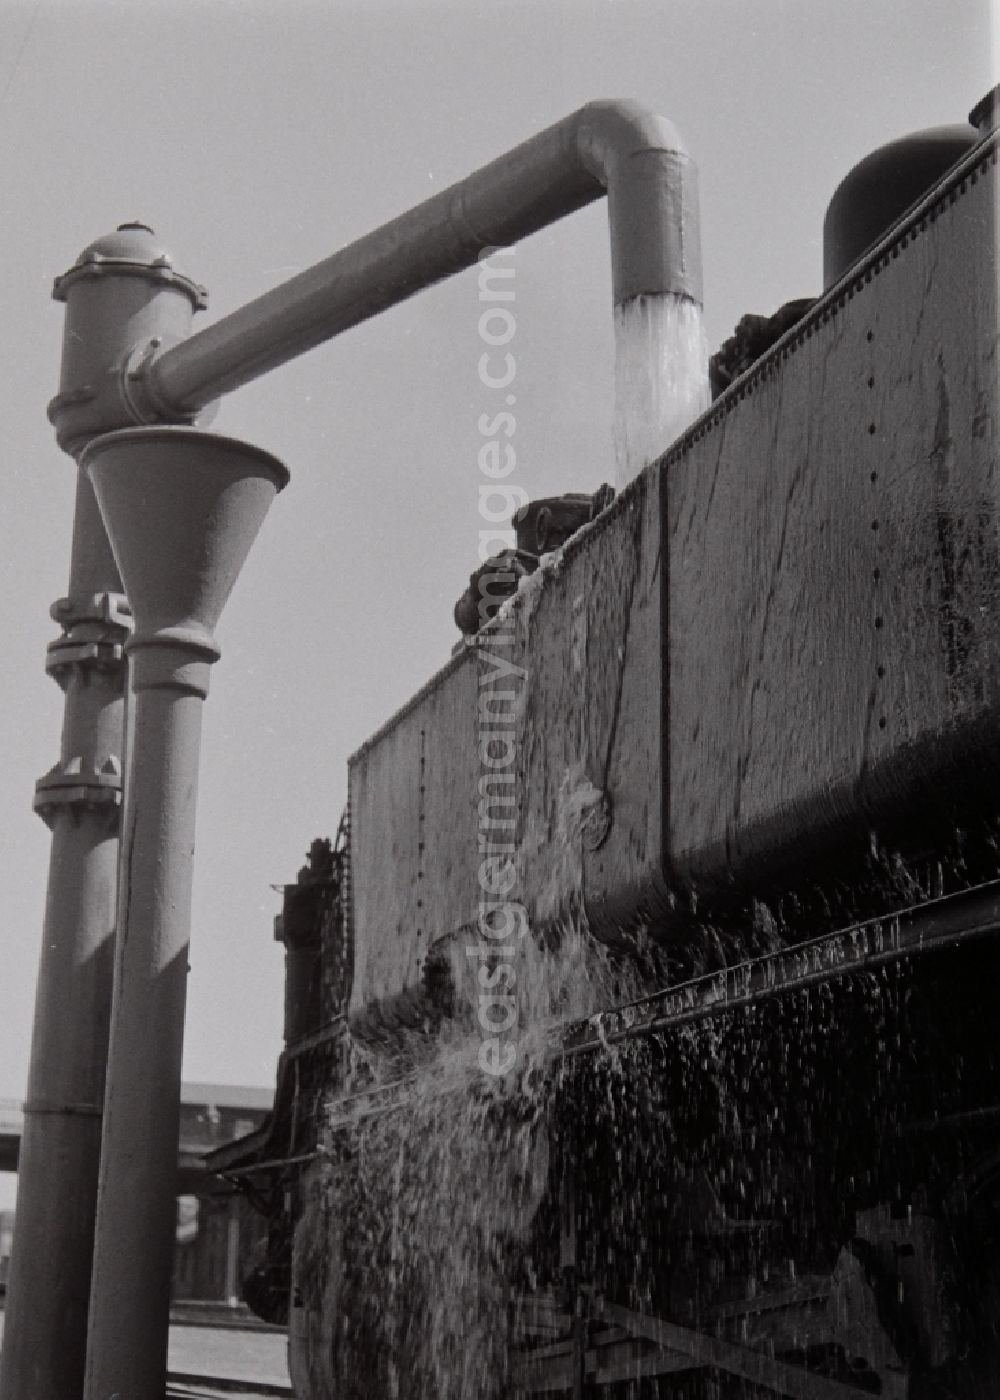 GDR image archive: Halberstadt - Filling at the water crane of a steam locomotive class 93 of the German Reichsbahn in Halberstadt in the federal state of Saxony-Anhalt on the territory of the former GDR, German Democratic Republic